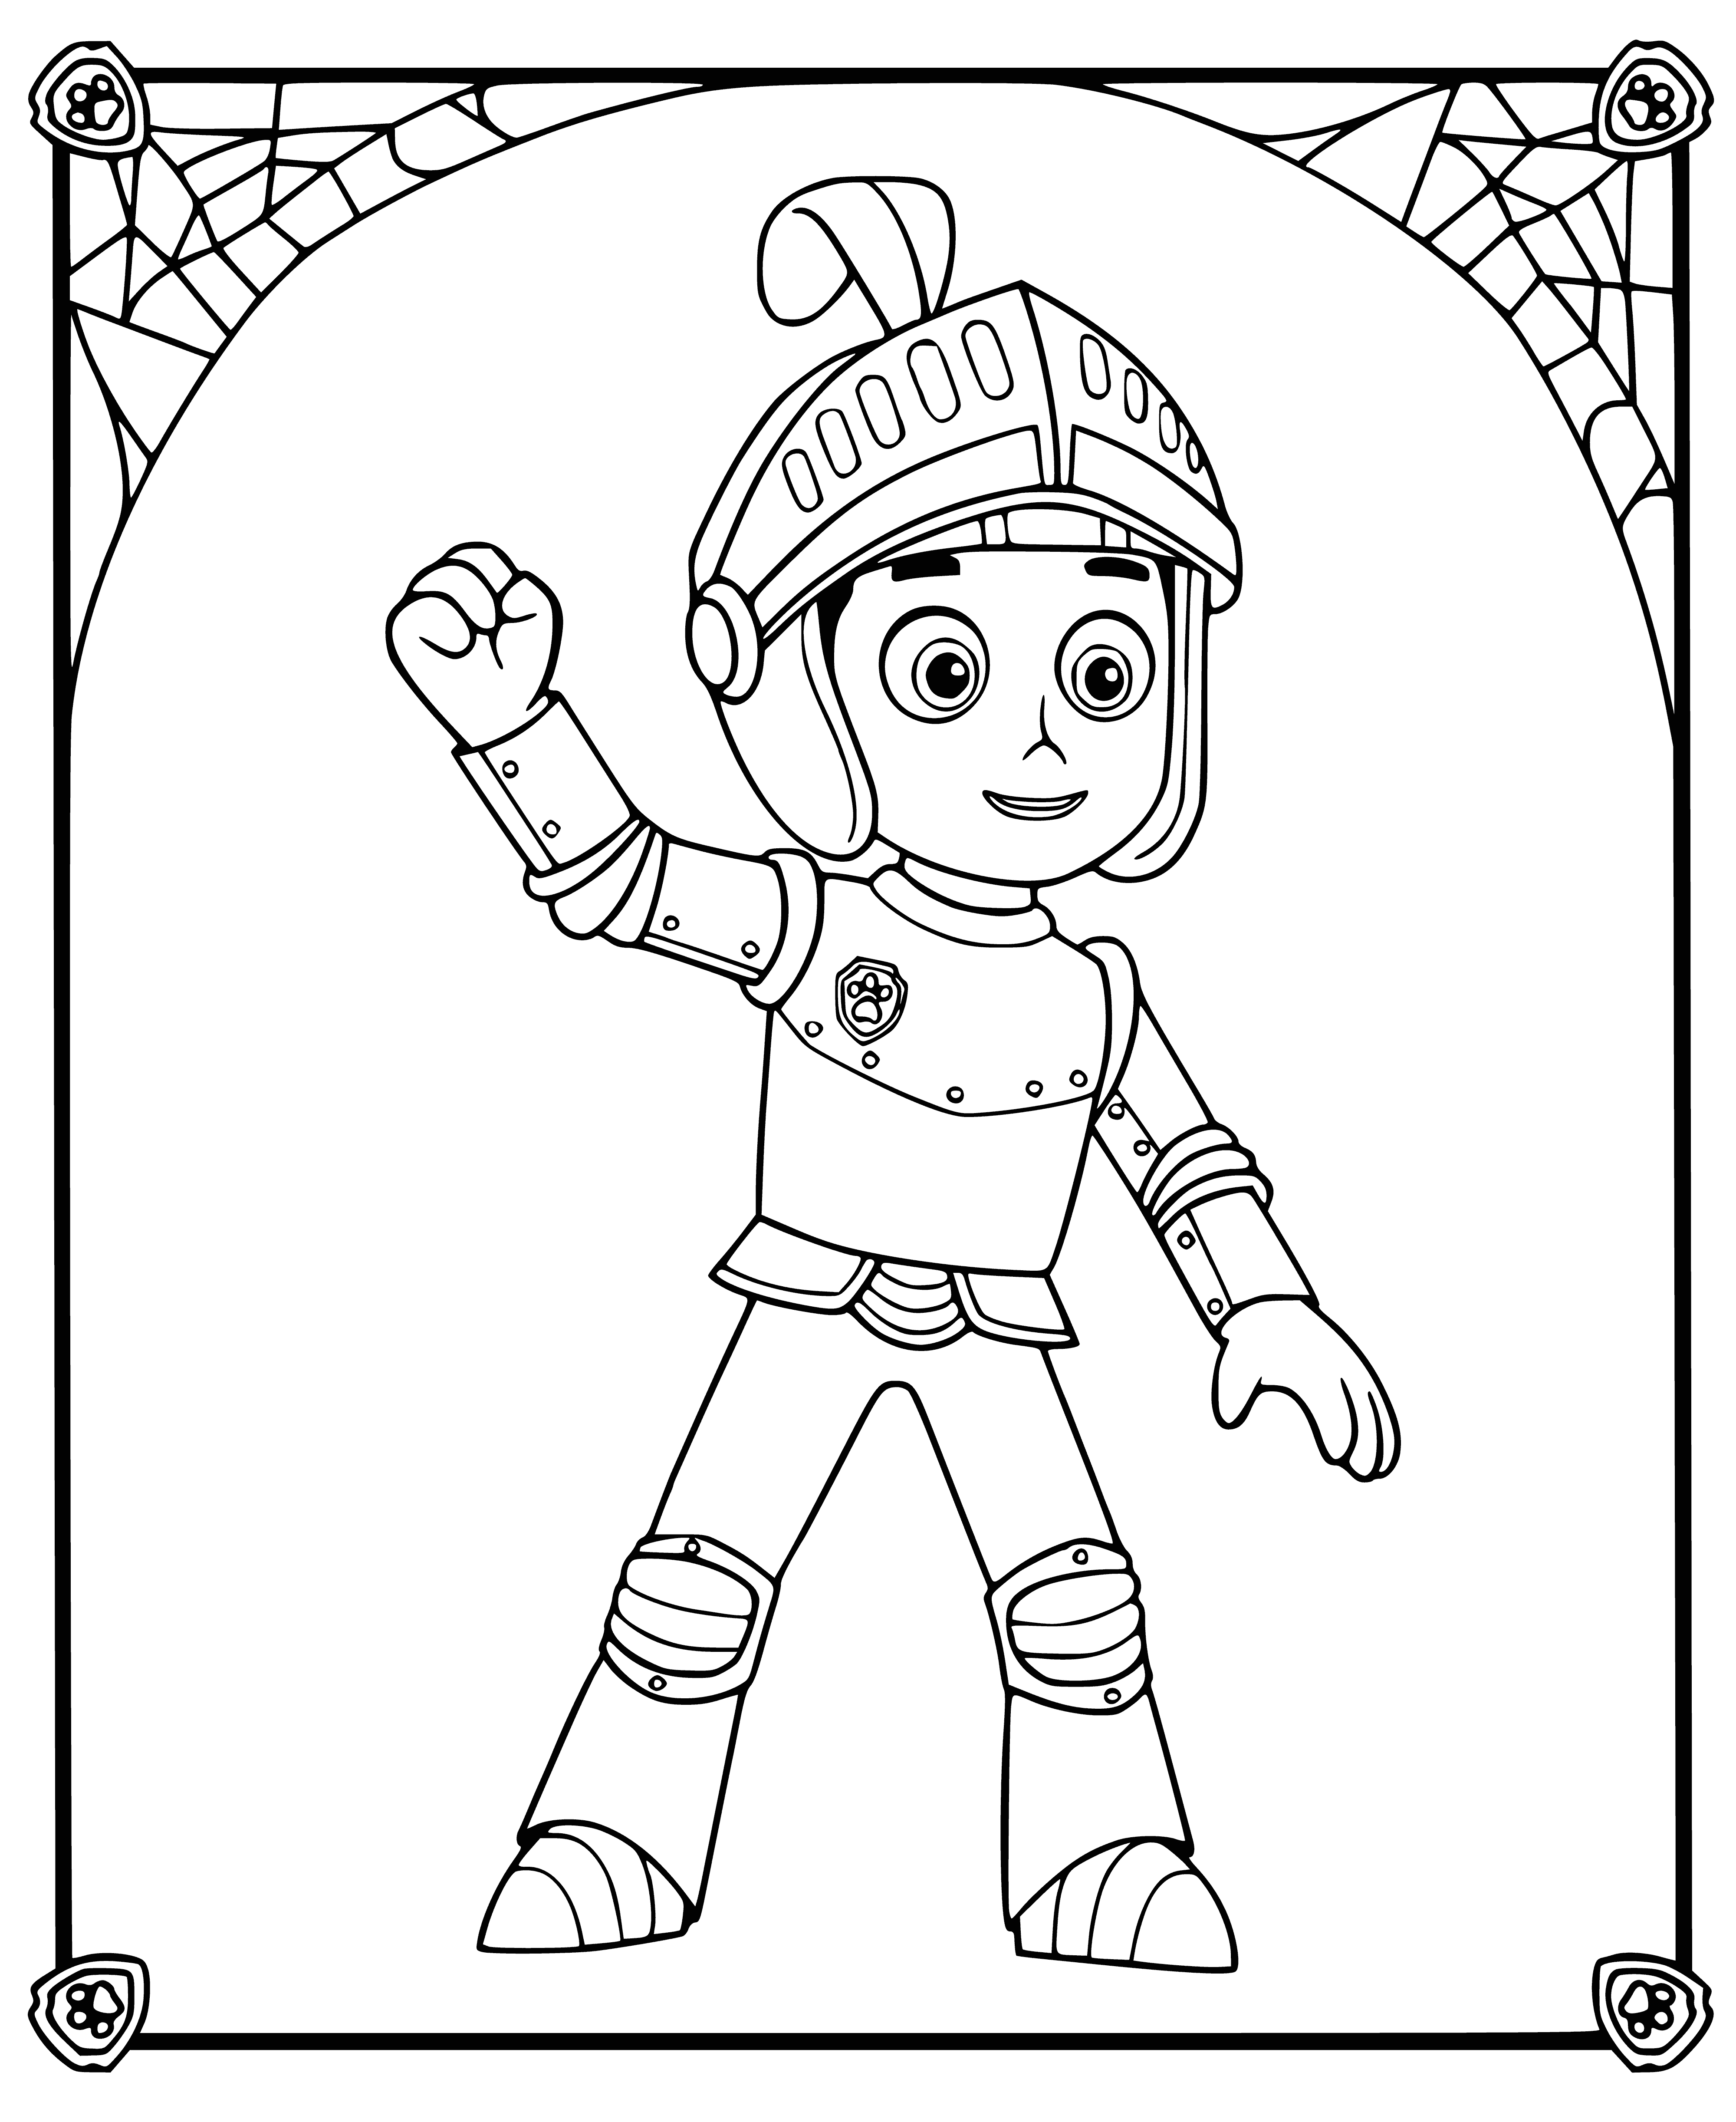 coloring page: The Rider Knight is a brave knight from PAW Patrol, ready to save the day with sword, shield and archery.